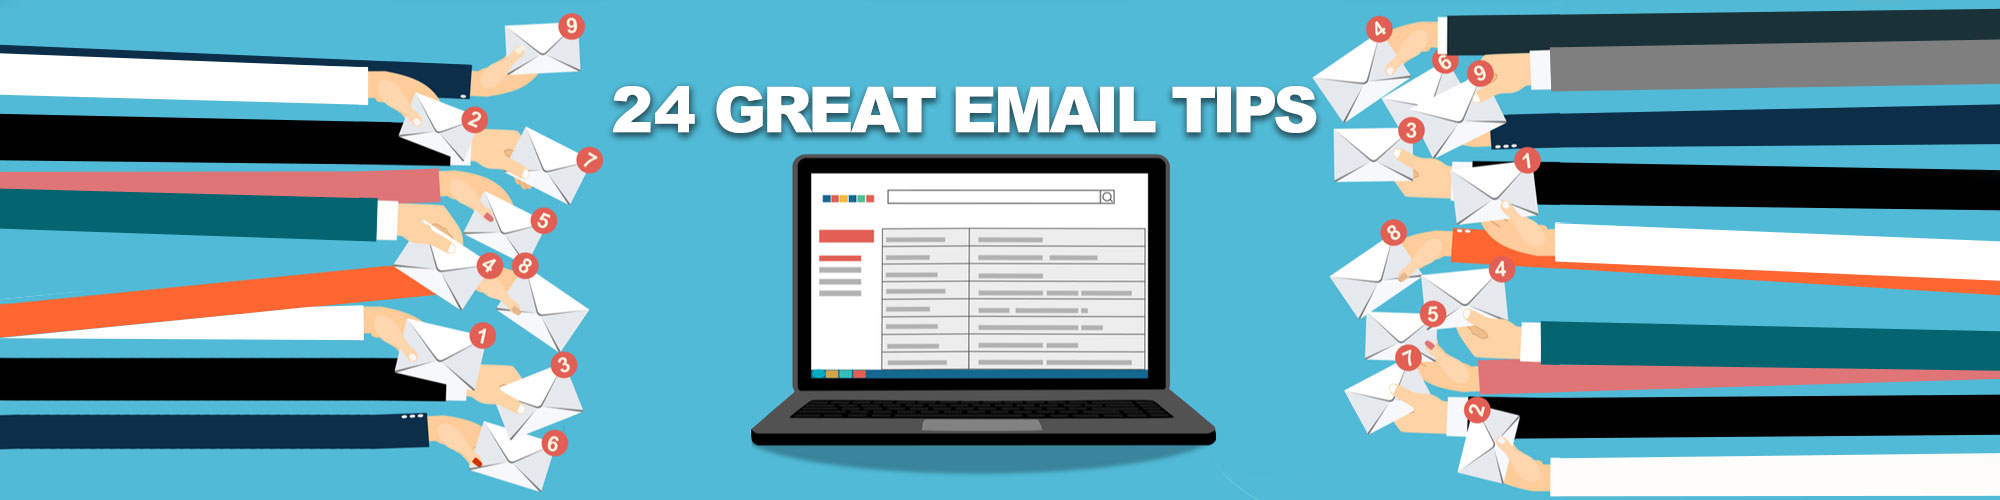 24 Tips For A Successful Email Marketing Campaign D2 Digital Designs Dallas Tx